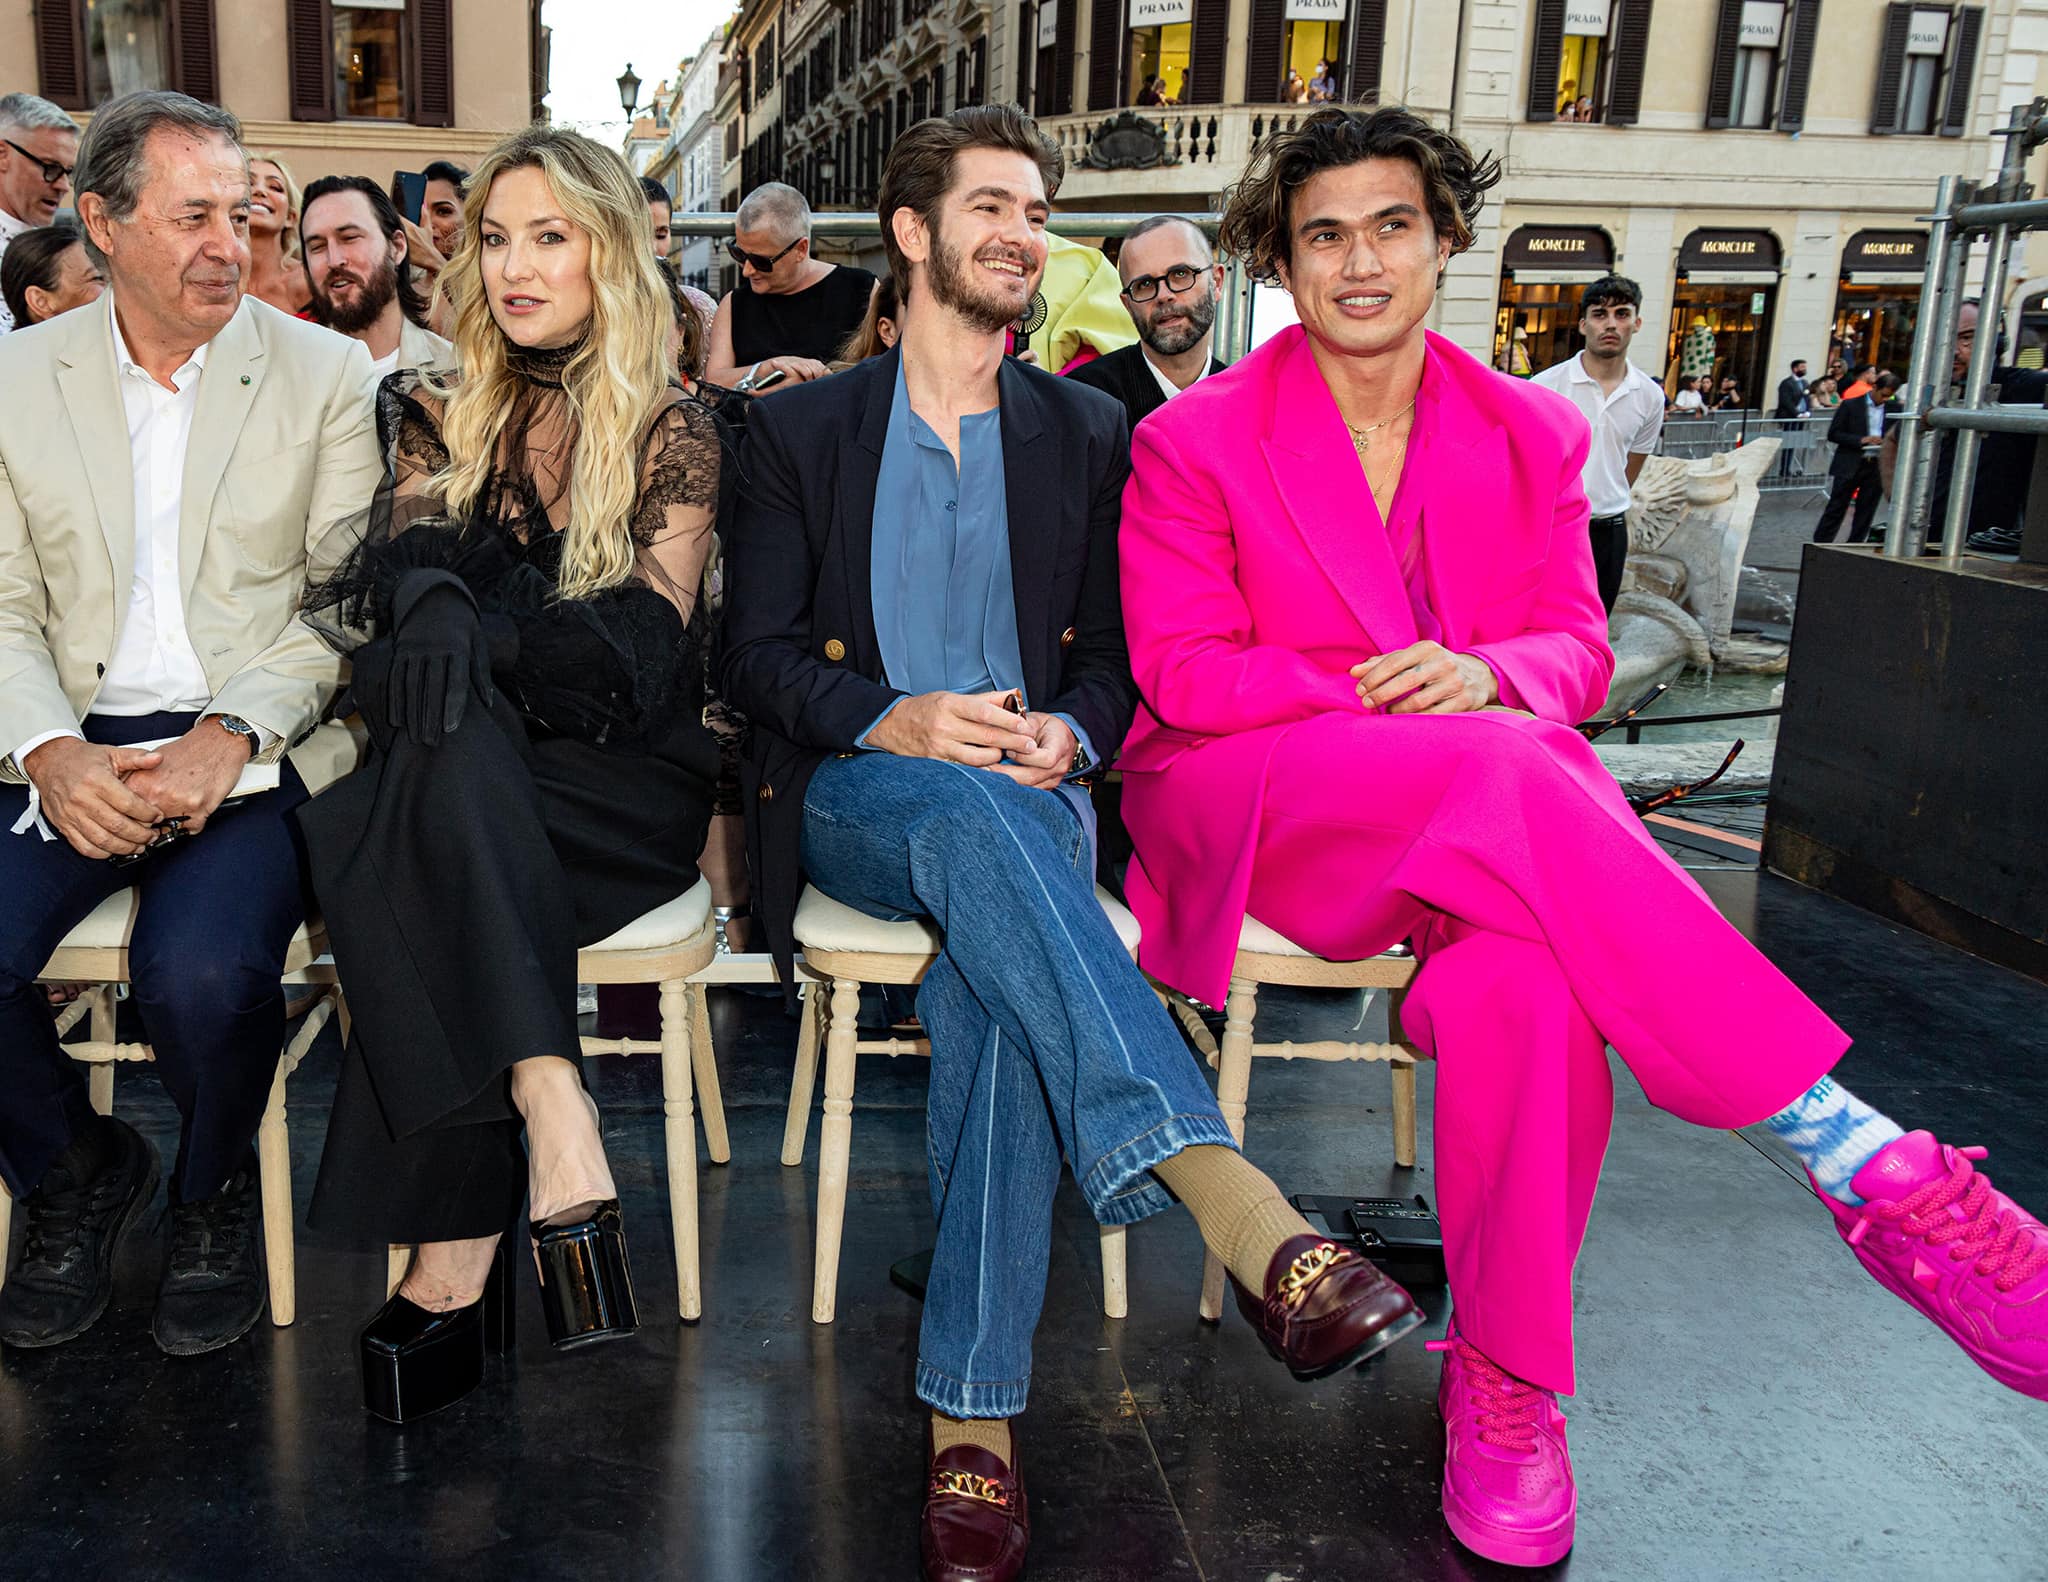 Kate Hudson sits front row next to Andrew Garfield and Charles Melton